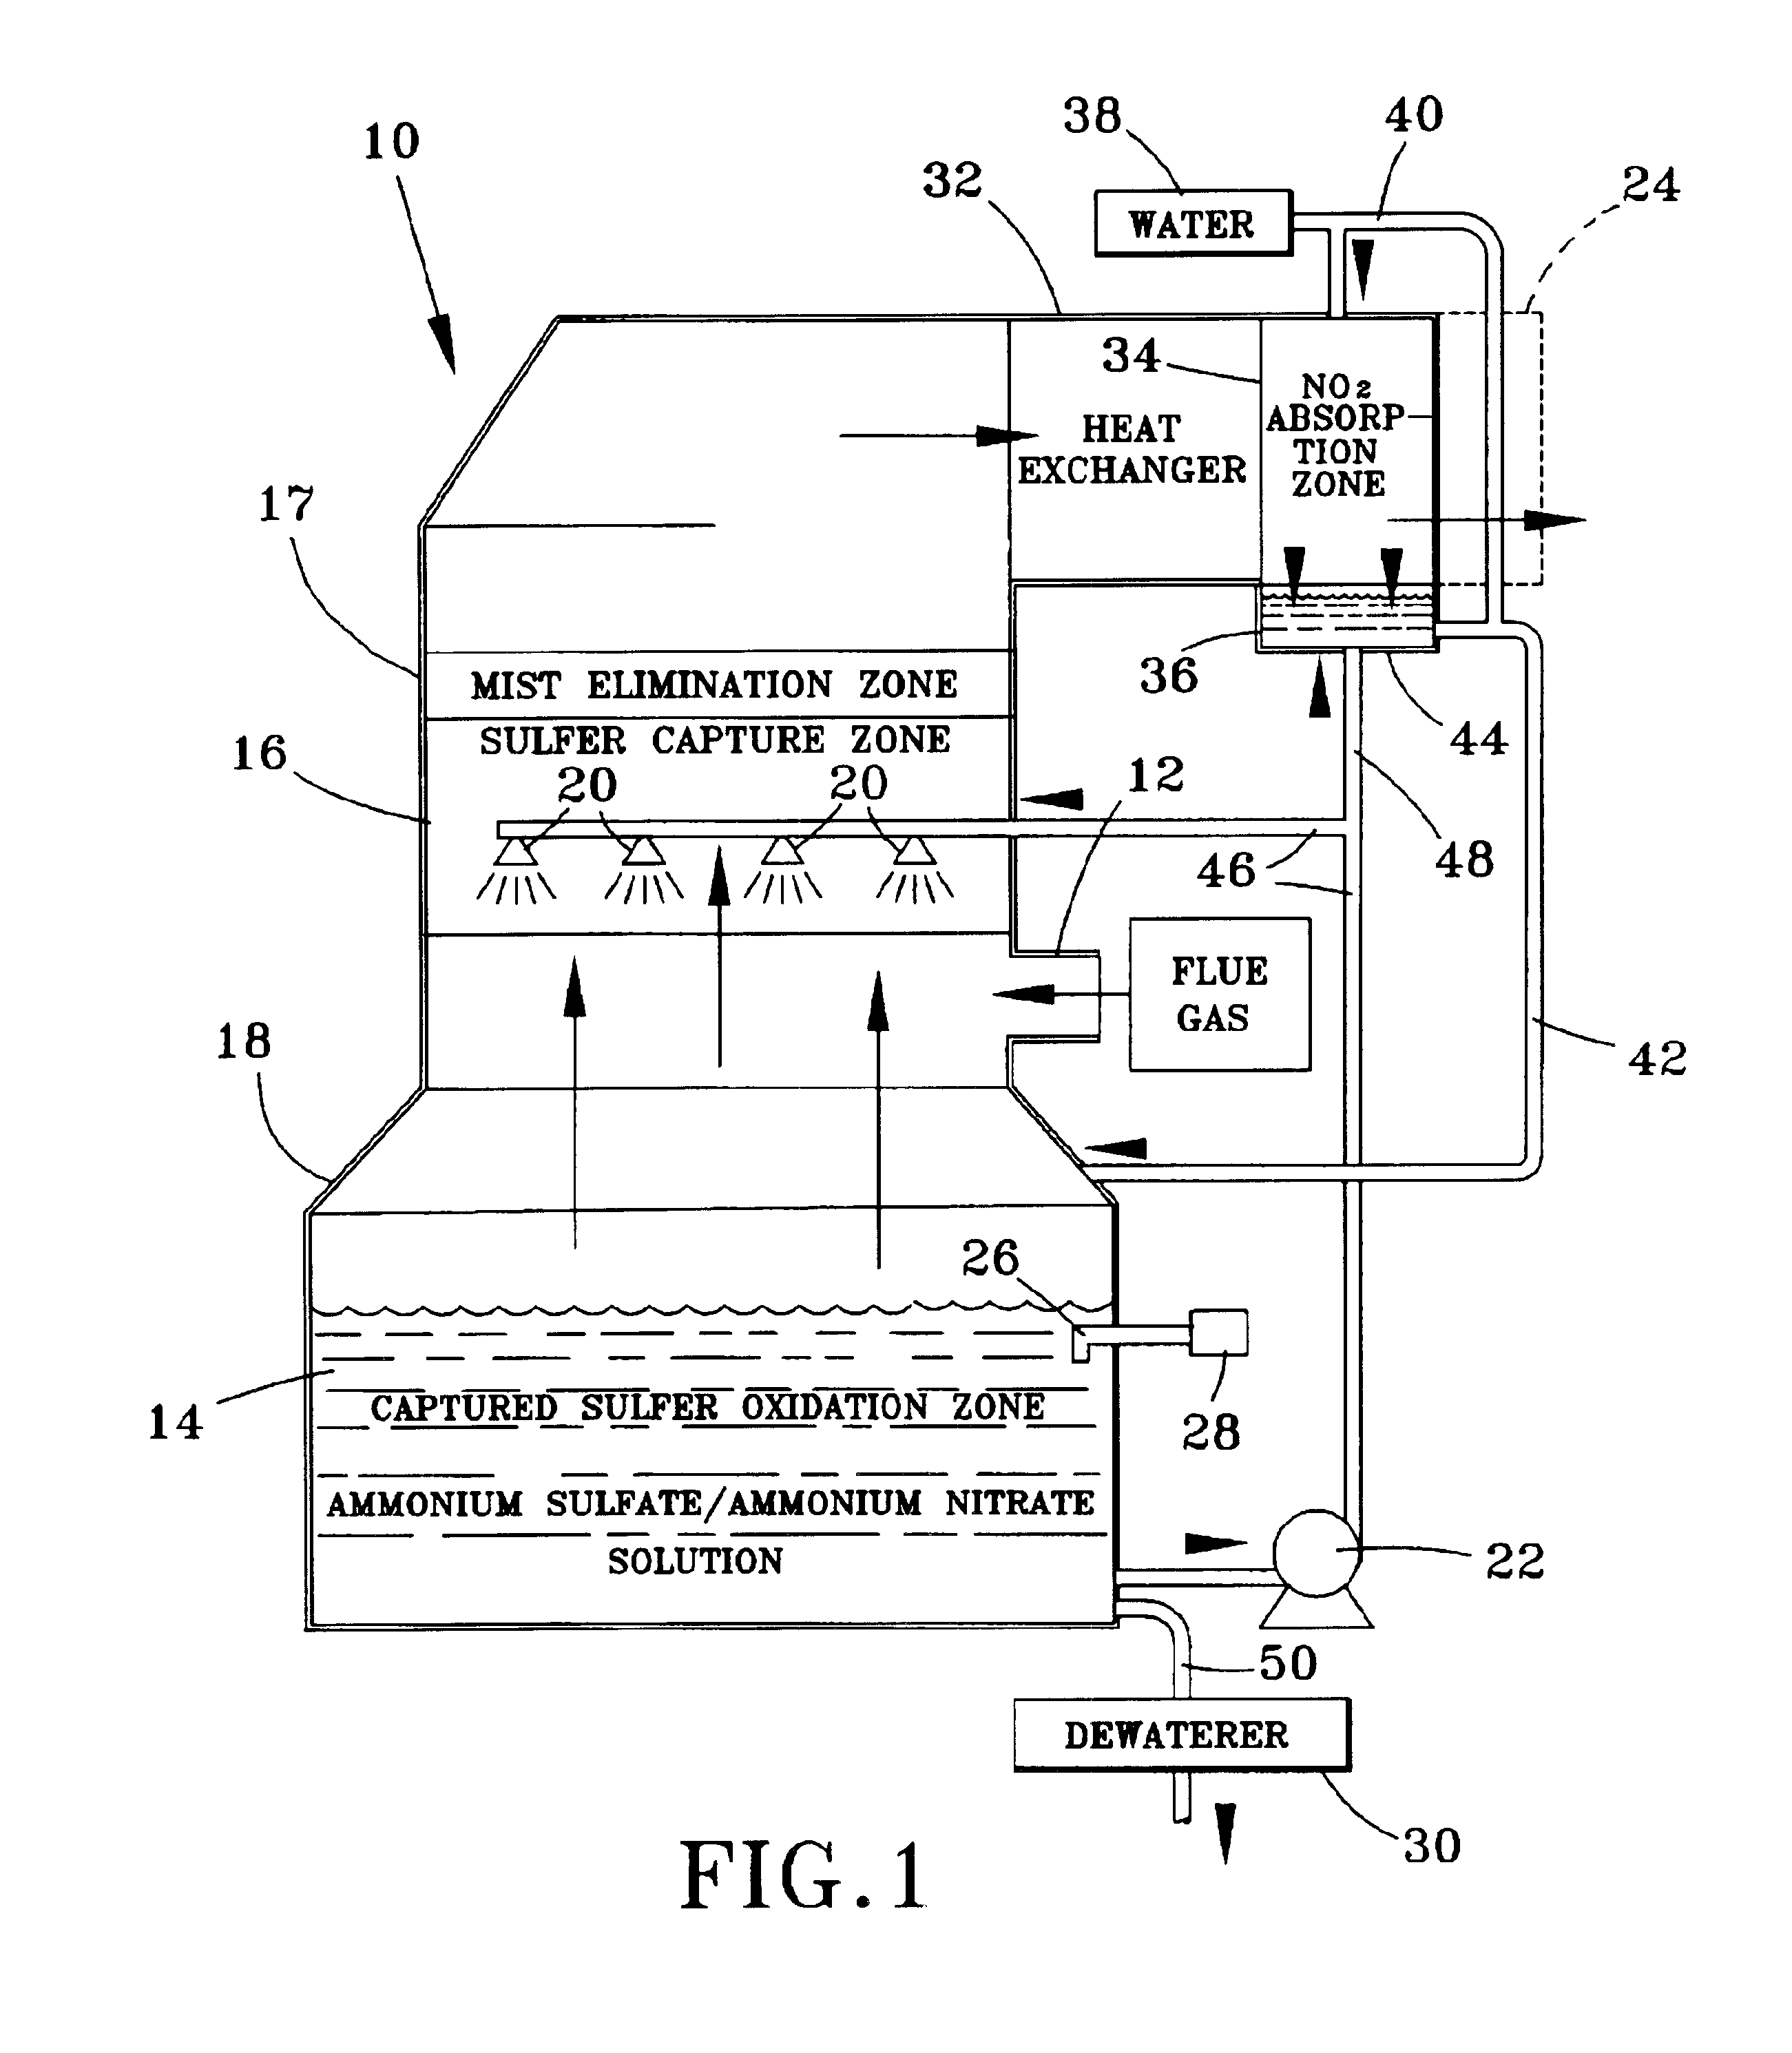 Flue gas desulfurization process and apparatus for removing nitrogen oxides